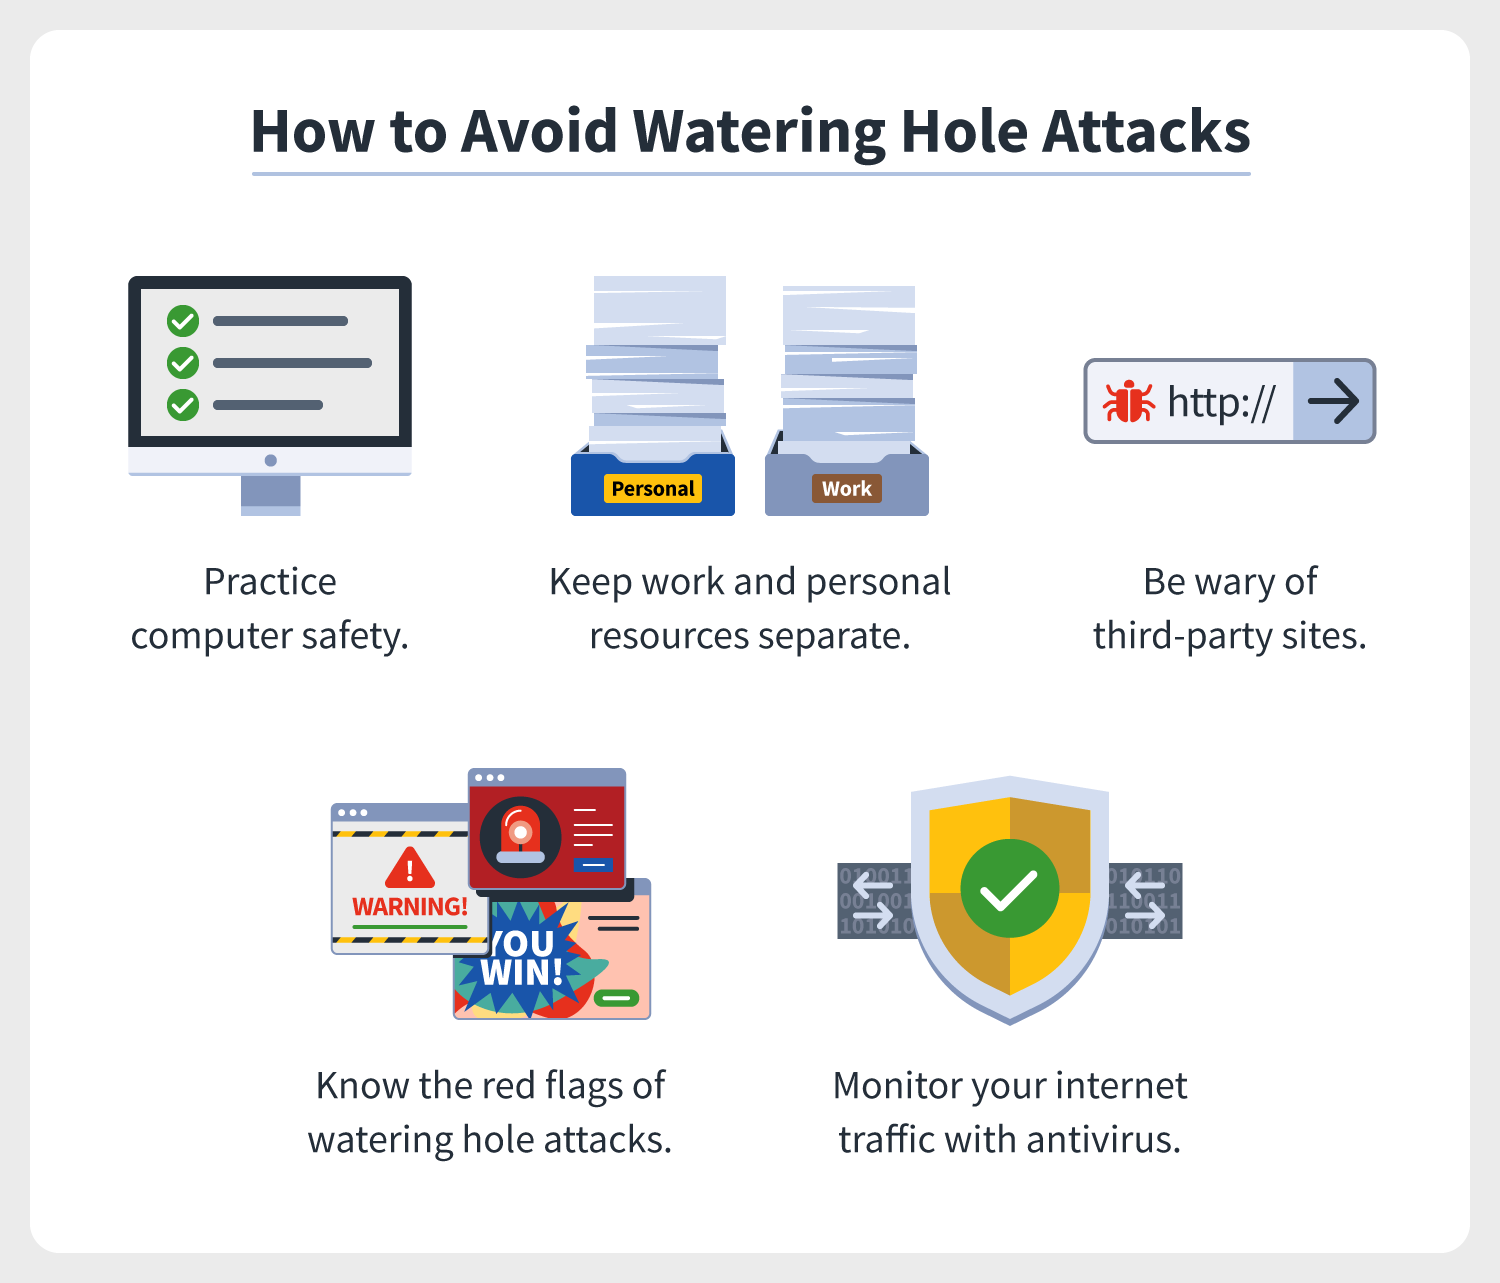 five illustrations allude to best practices for how to avoid watering hole attacks, including by practicing computer safety, keeping work and personal resources separate, and being wary of third-party sites